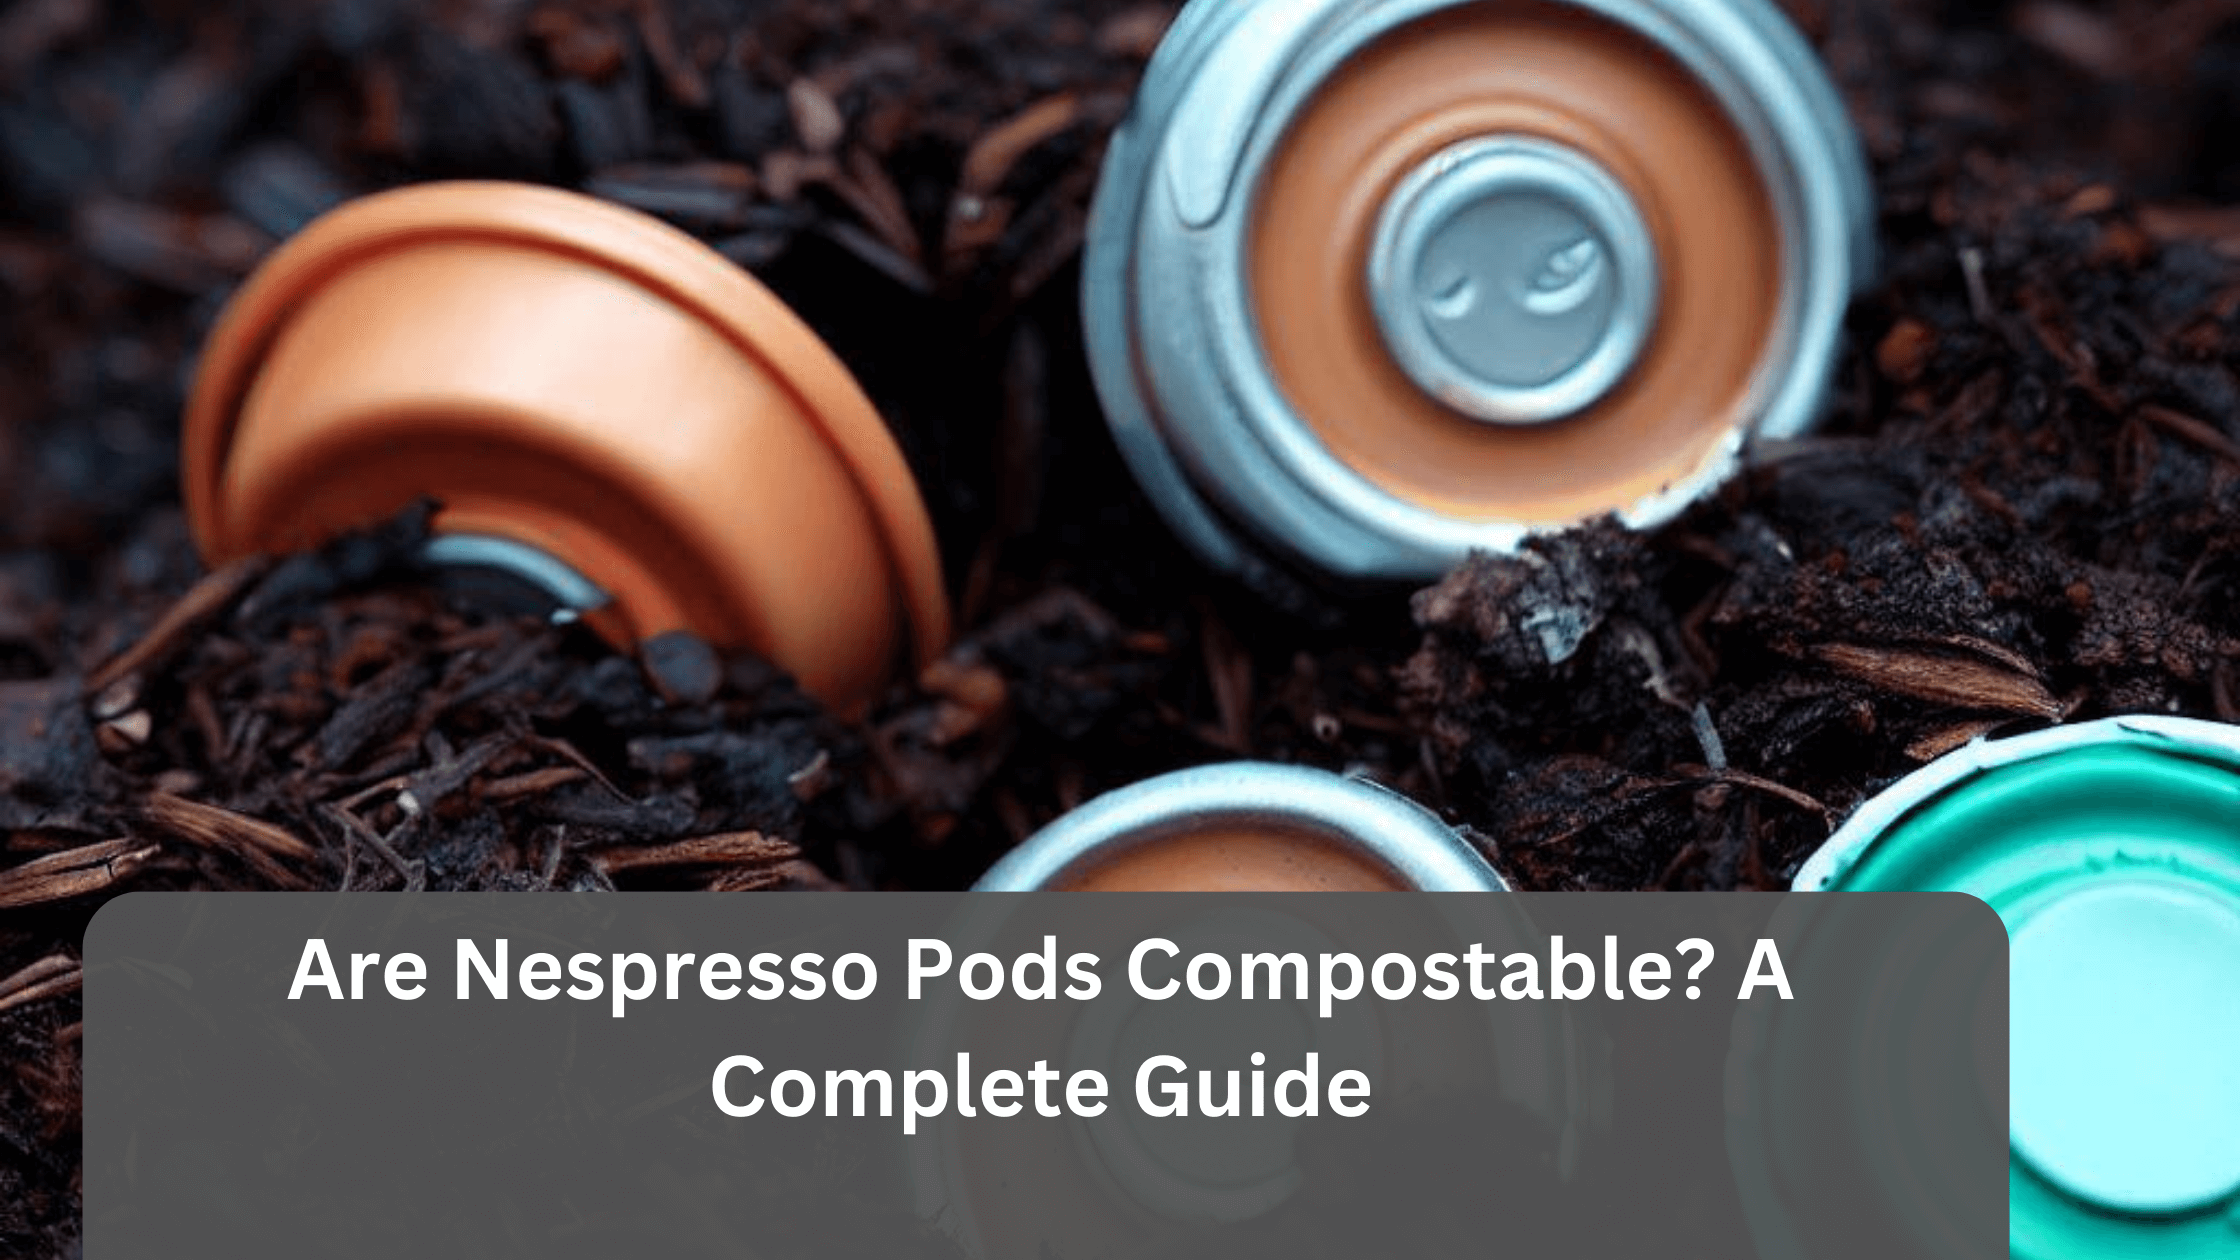 The Ultimate Guide to Nespresso’s Compostable Pods